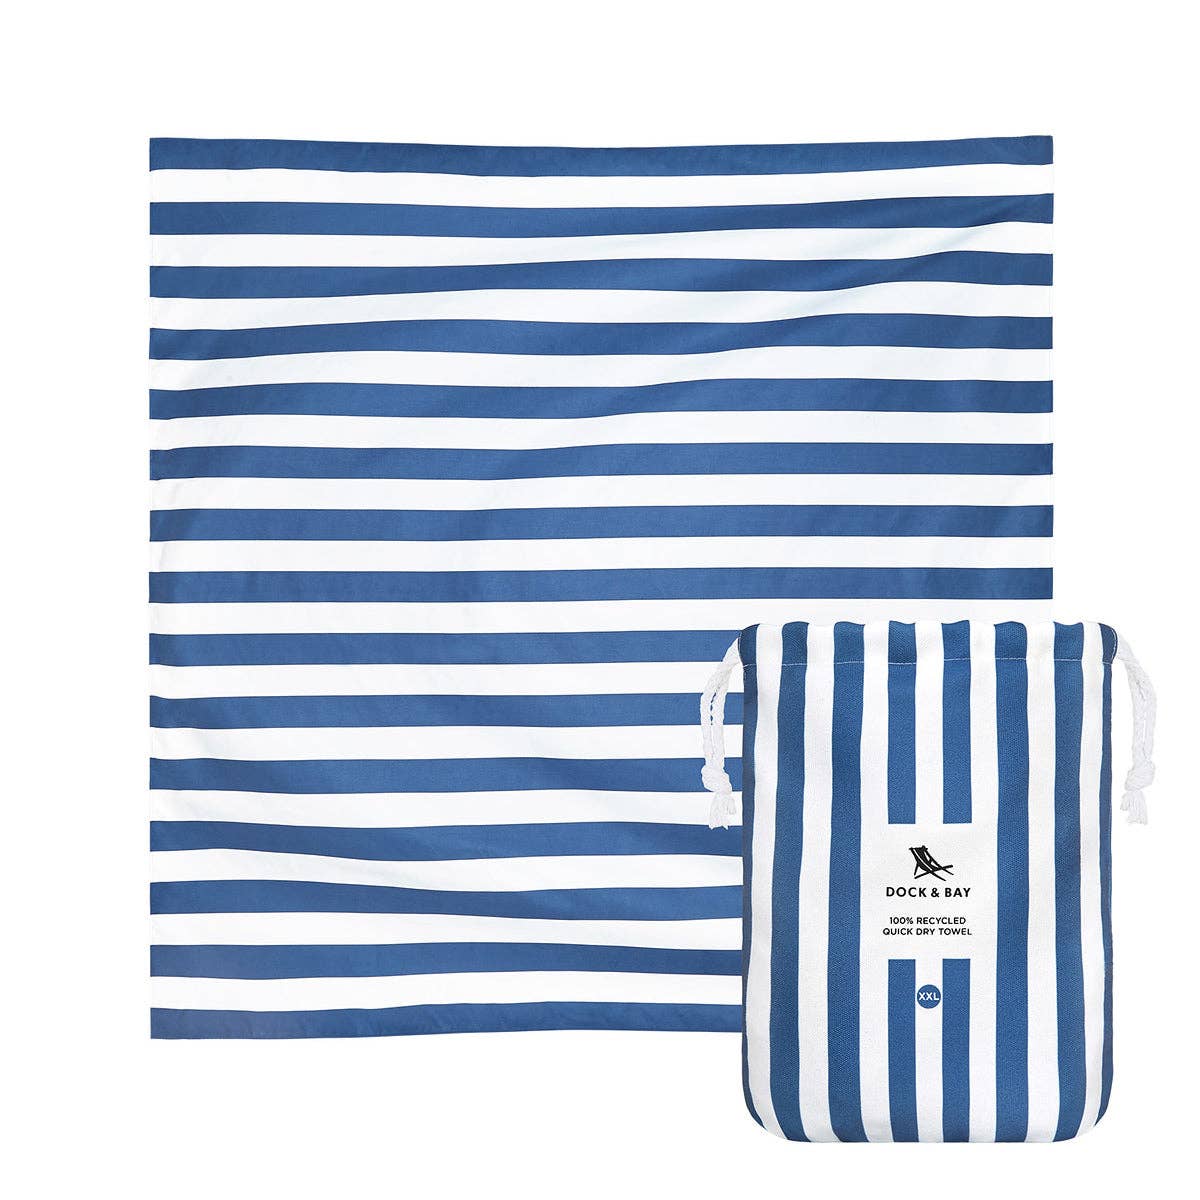 Dock & Bay Quick Dry Towel for Two - Double Extra Large  - Whitsunday Blue - The Preppy Bunny